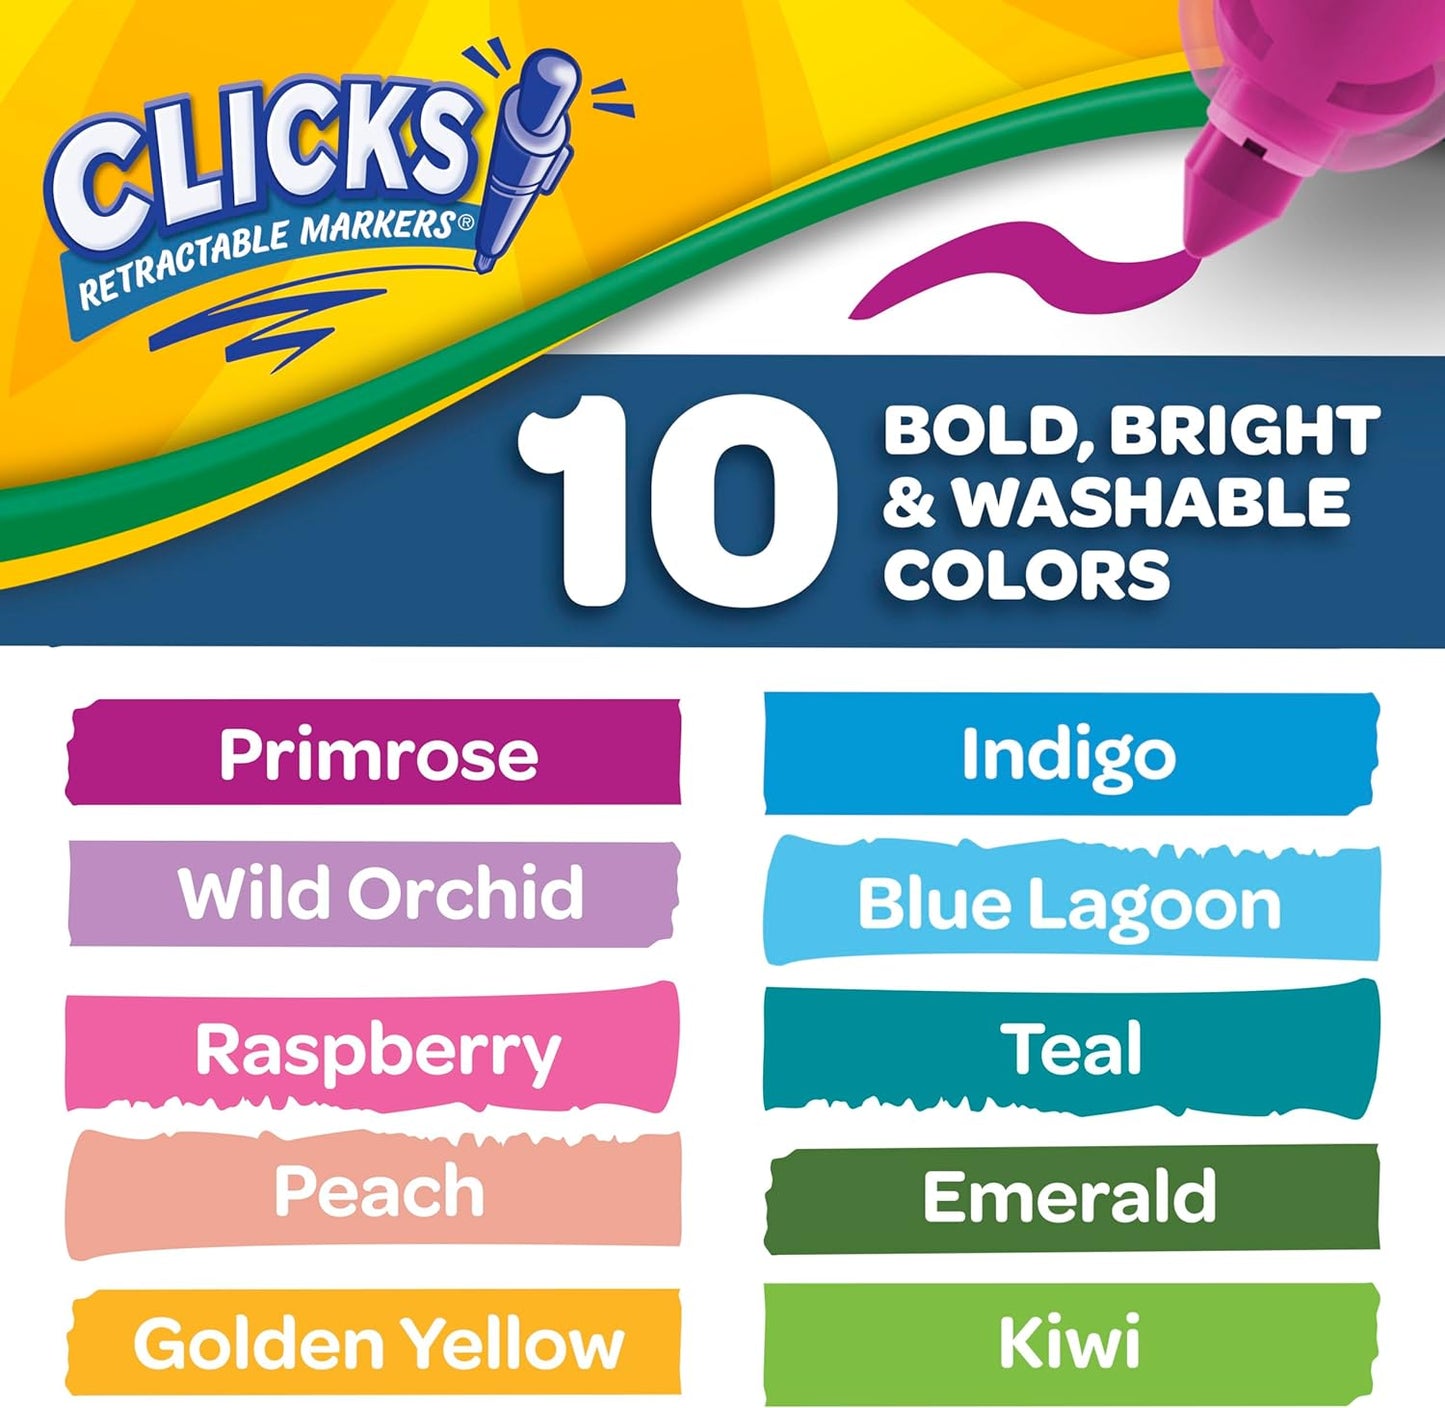 Crayola Washable CLICKS Retractable Markers - Pack of 10